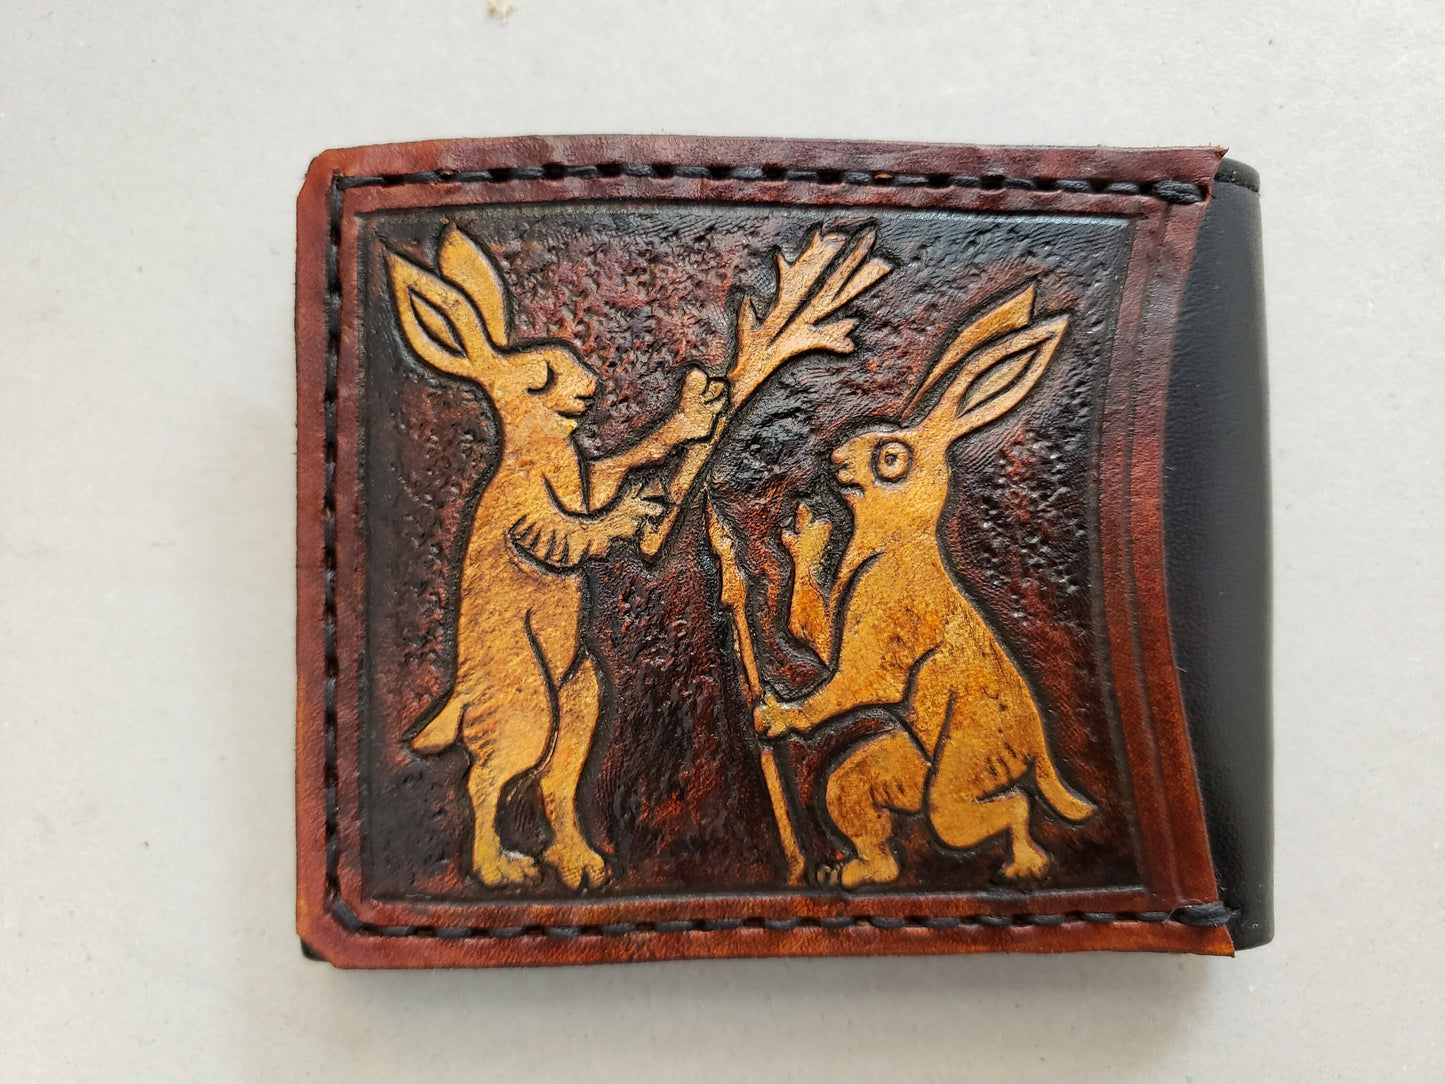 Marginalia medieval rabbits - leather wallet- Dark Brown and ivory colour - Leather Bifold Wallet - Handcrafted